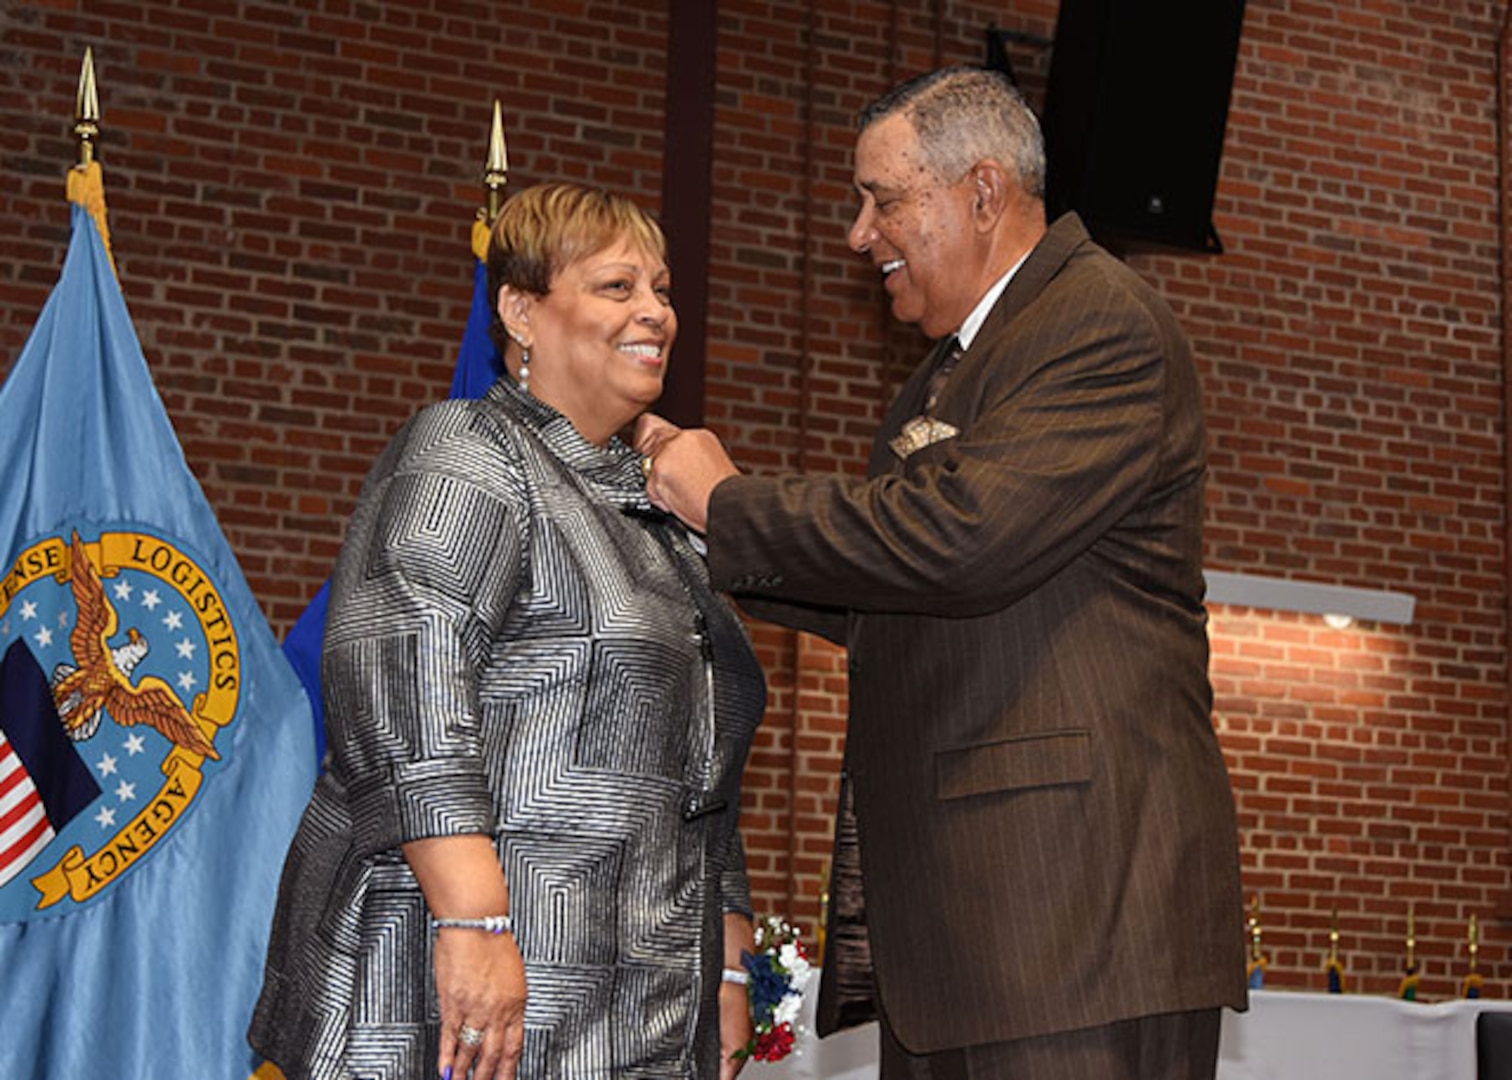 President of the American Federation of Government Employees Local 1992, Lucy Lewis receives her retirement pin from her brother, retired Navy Master Chief Petty Officer Thomas Keiser, during a ceremony Nov. 24, 2015 in the Frank B. Lotts Conference Center on the occasion of her retirement from federal service after 41 years. 